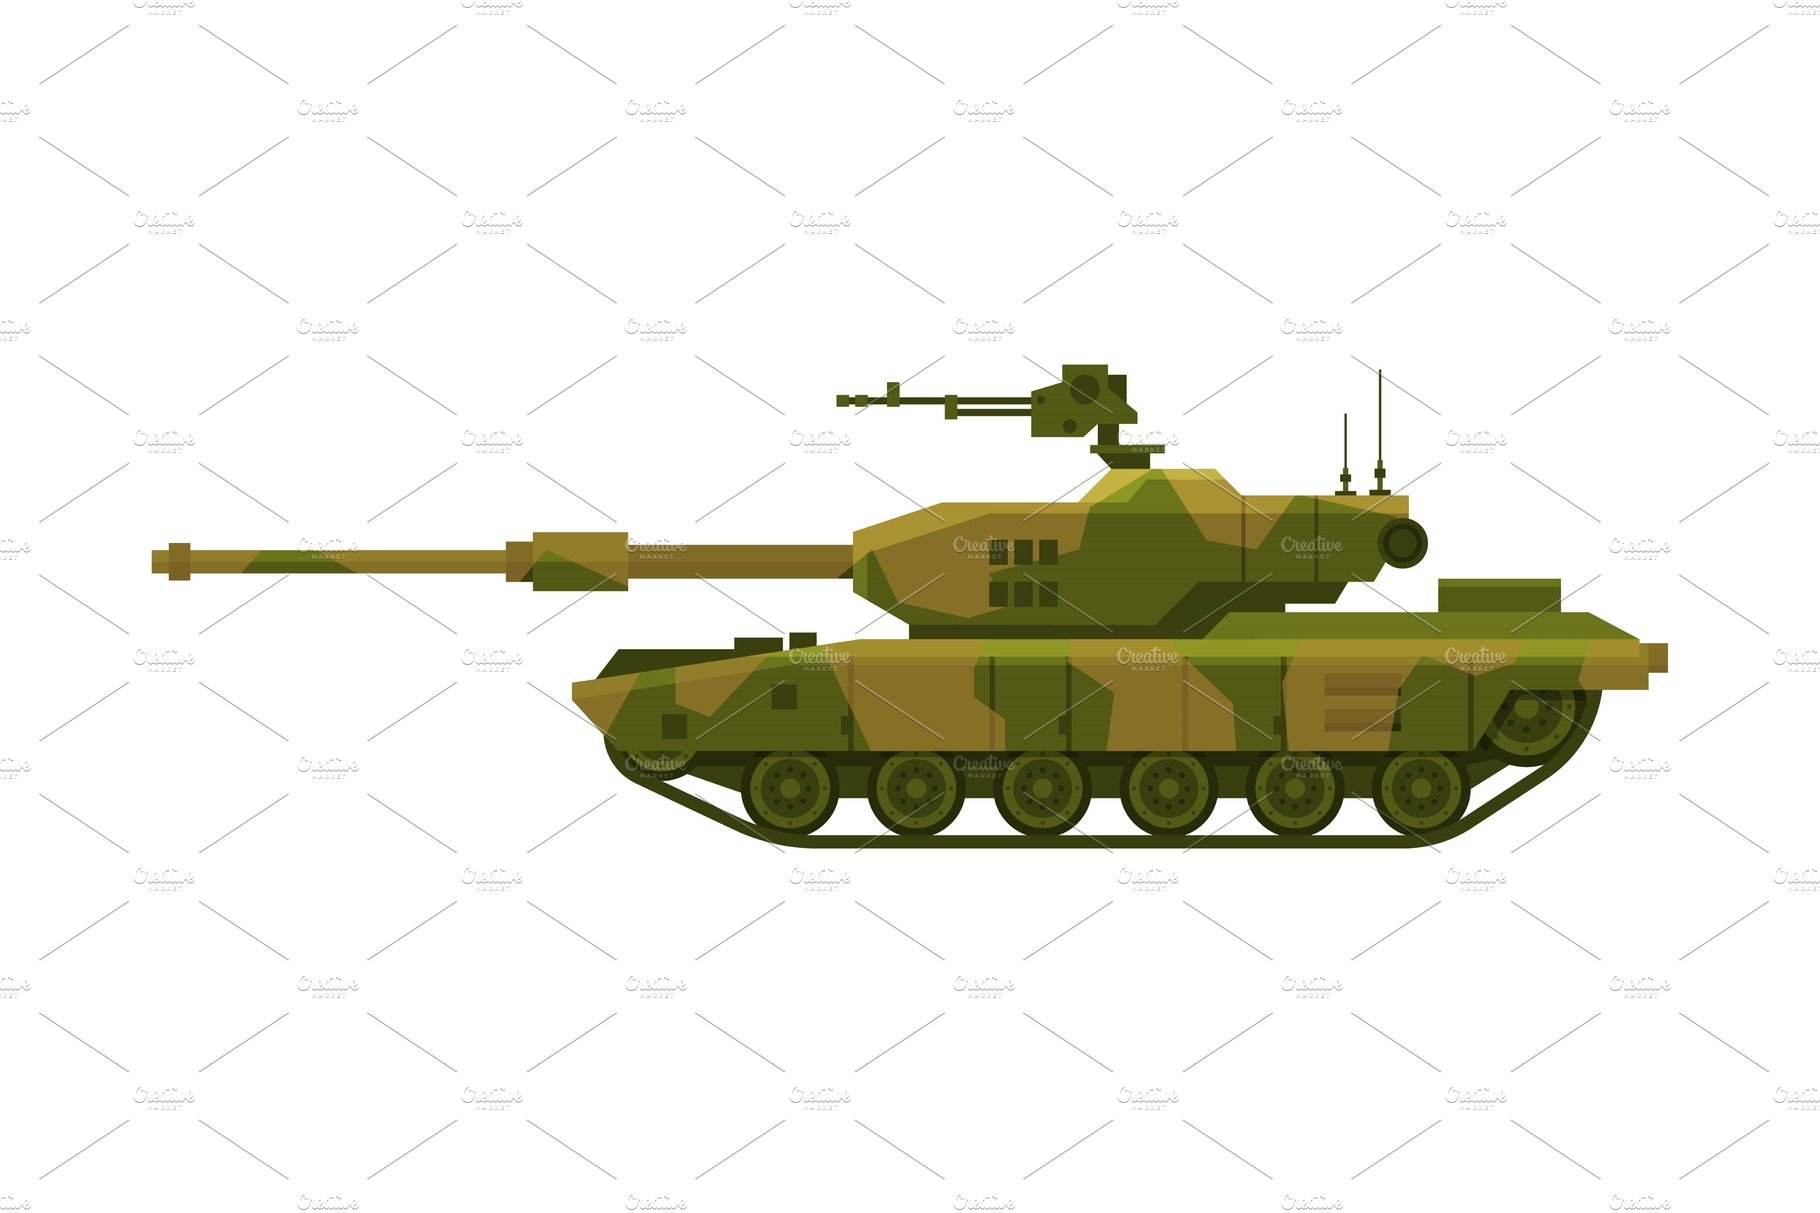 Military Tank, Heavy Camouflage cover image.